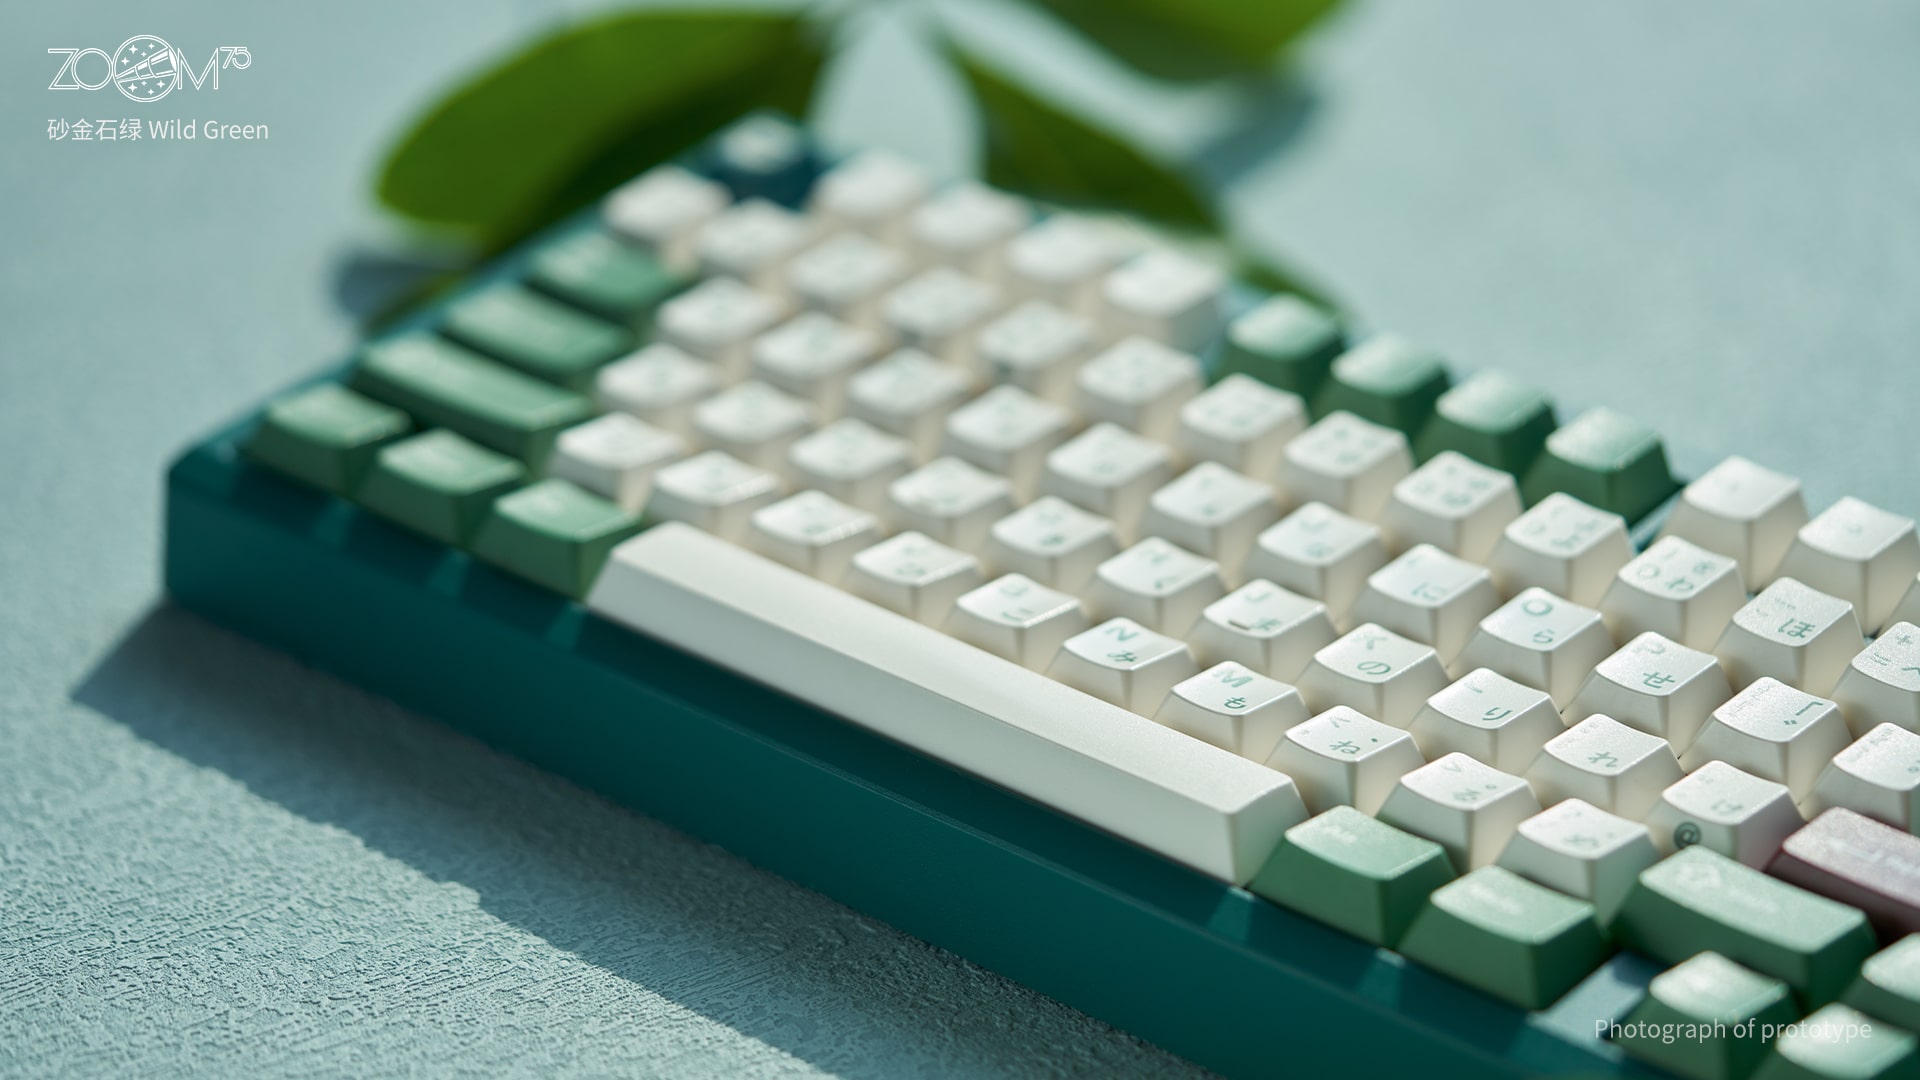 [Extra GB] [Oct] Zoom75 Keyboard Essential Edition - Case Wild Green